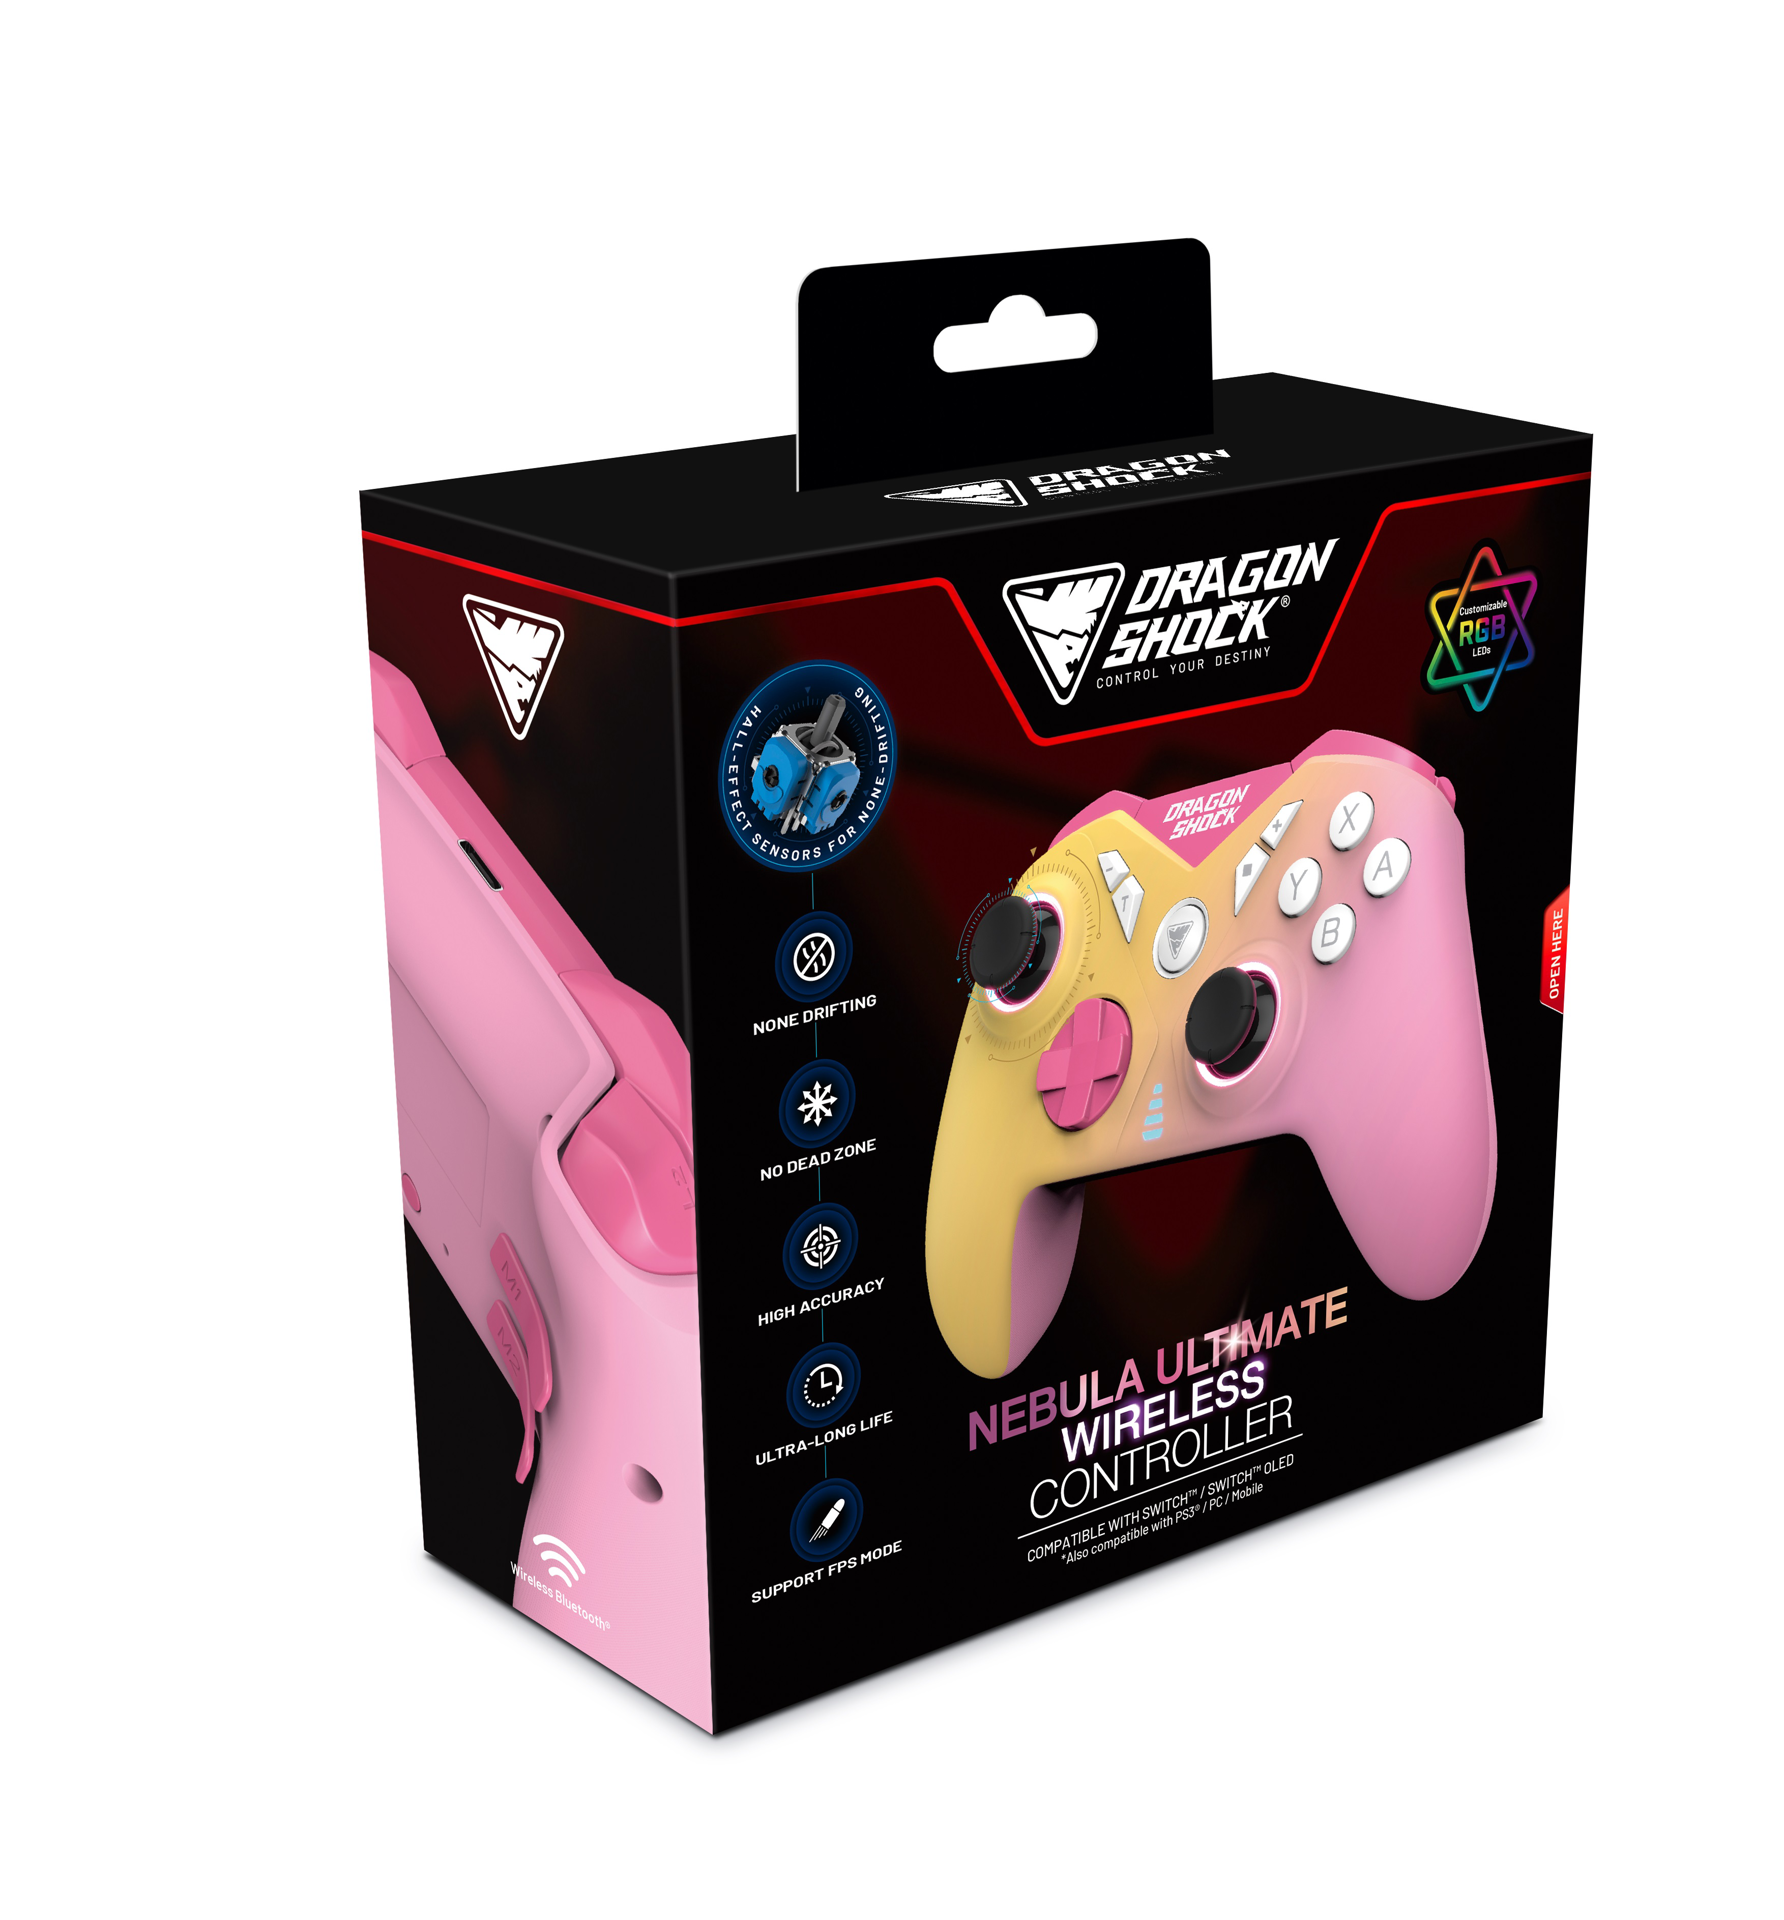 DragonShock - NEBULA ULTIMATE - Manette sans fil Pro Rose pour Nintendo Switch, Switch Lite, Switch OLED, PS3, PC et Android